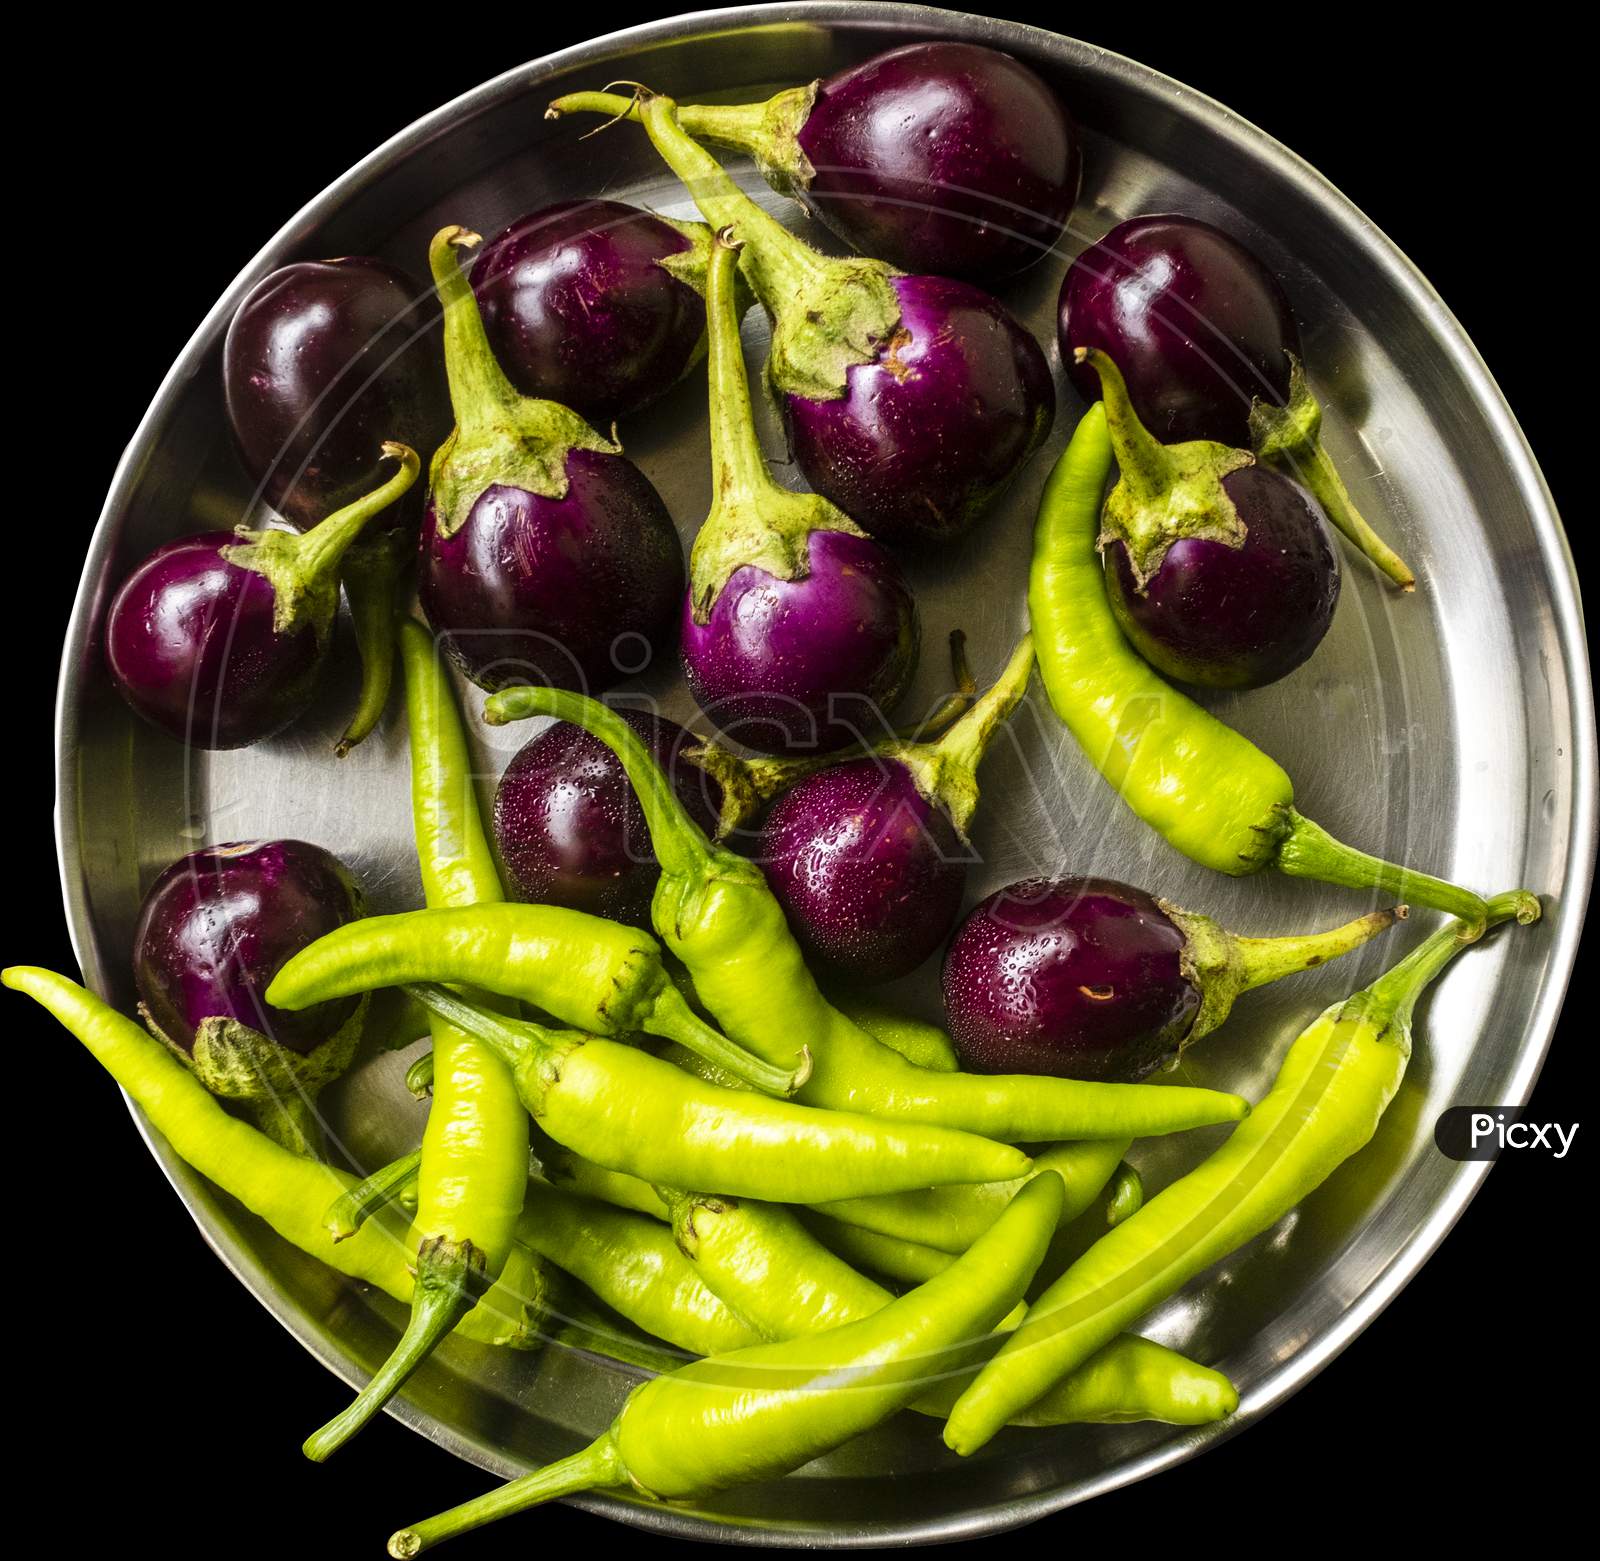 steel dish full of brinjal and green chillies, black background